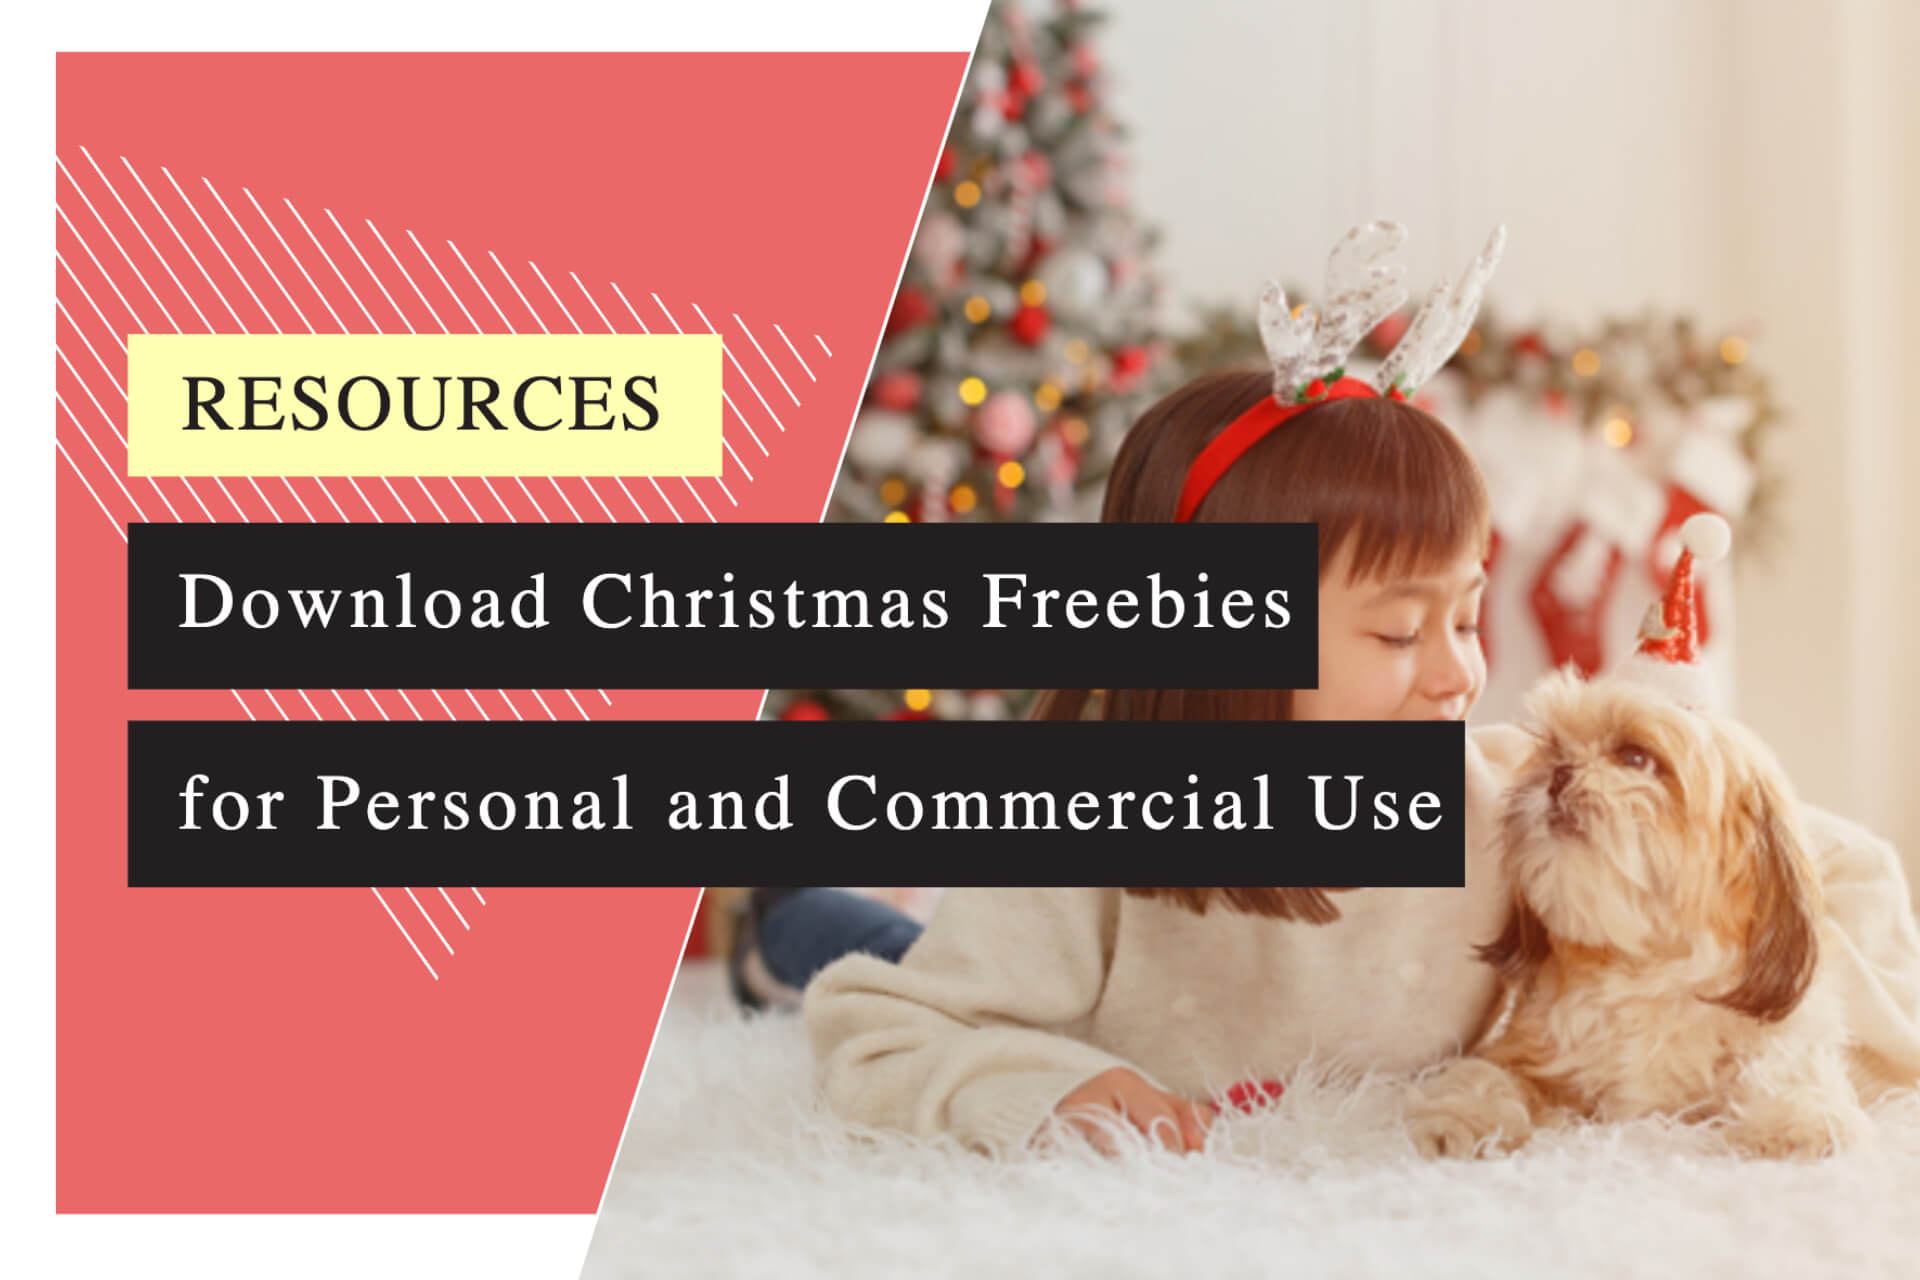 Download Christmas Freebies for Both Personal and Commercial Use